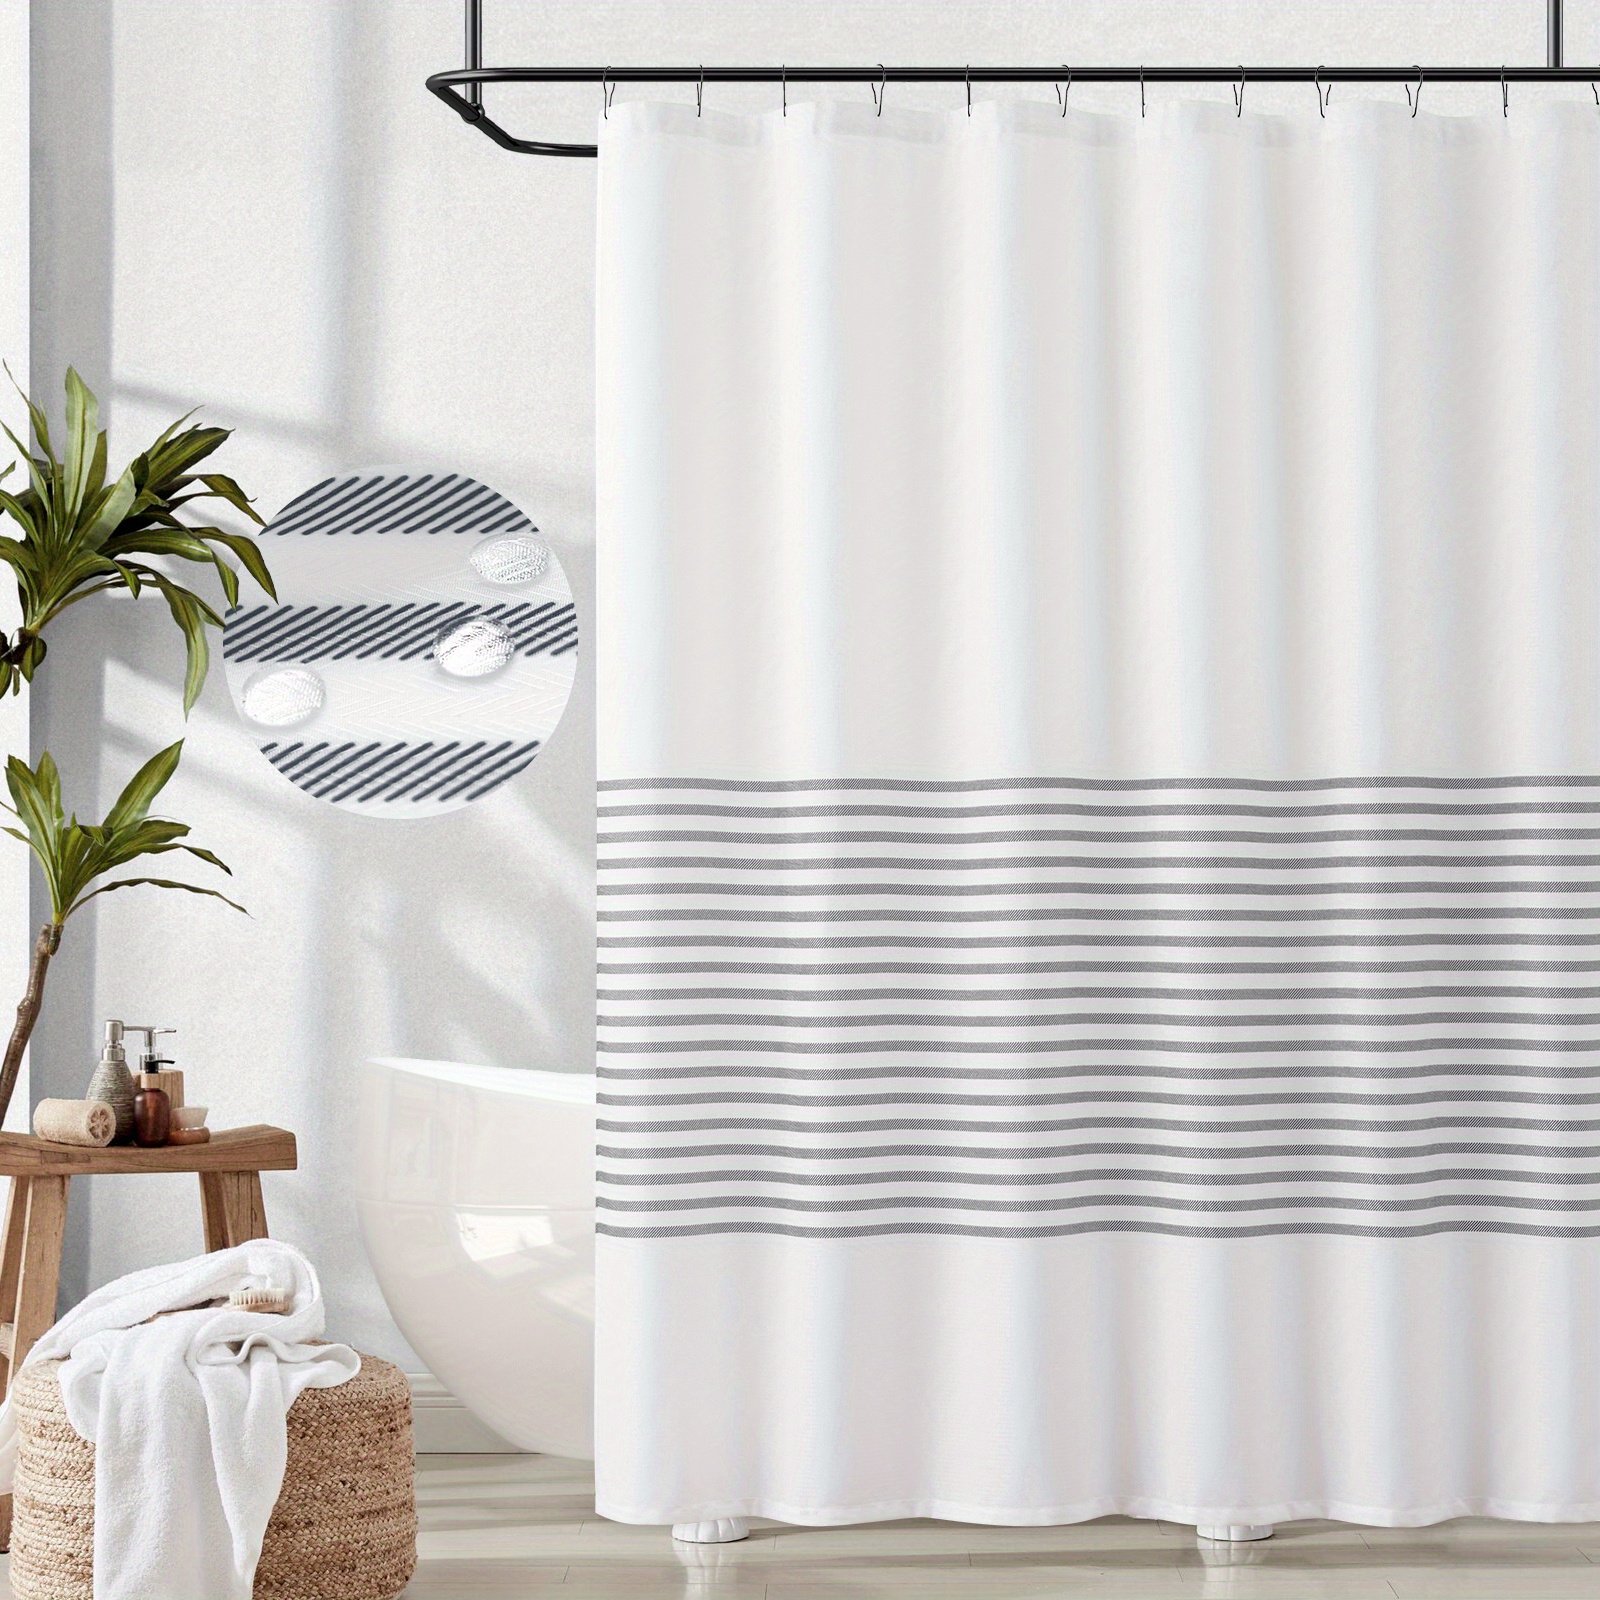 

Jinchan White Shower Curtain With Stripes Waterproof Fabric Shower Curtain For Bathroom Modern Neutral Farmhouse Shower Curtain 70x72 Inches With Hooks Shower Curtains Set Dorm